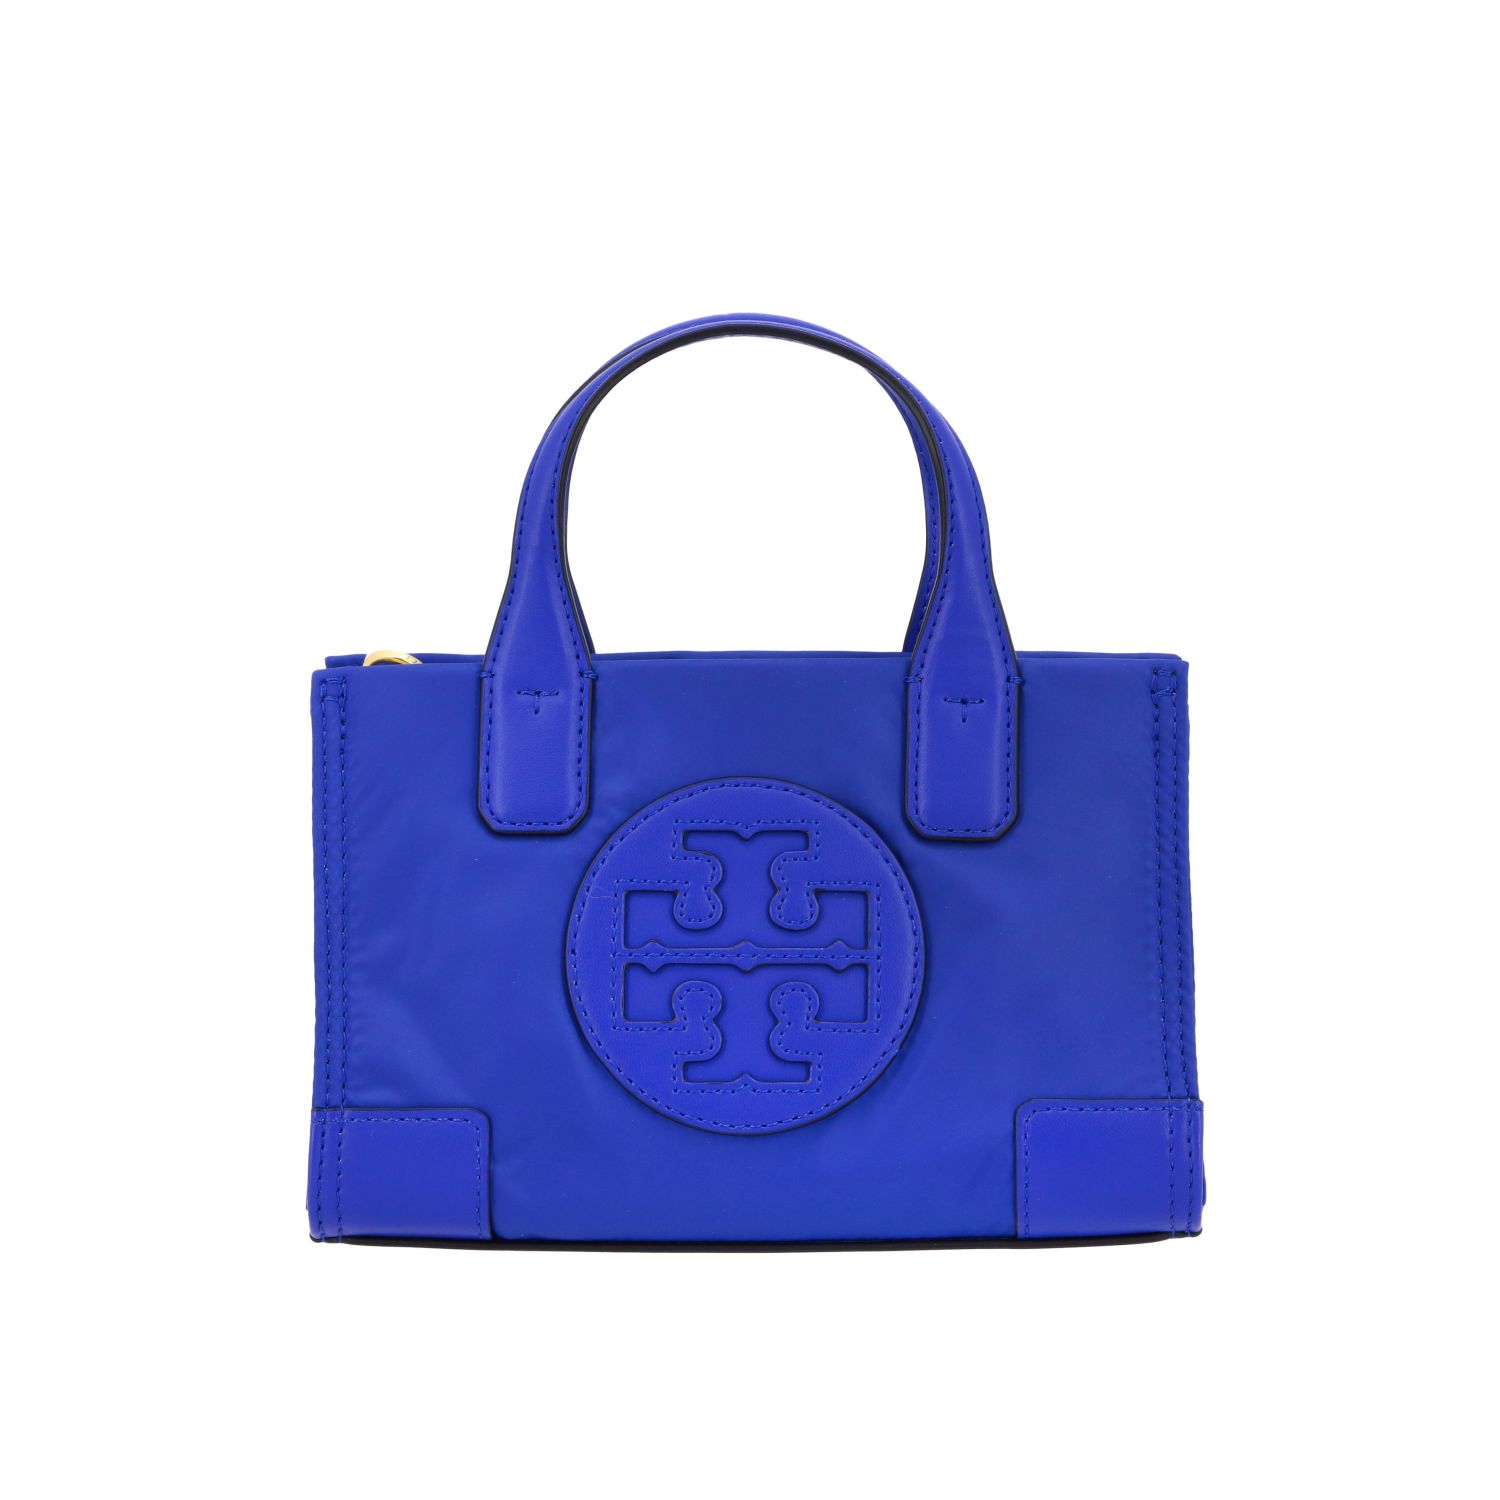 Tory Burch handbag in canvas and leather with emblem | Mini Bag Tory ...